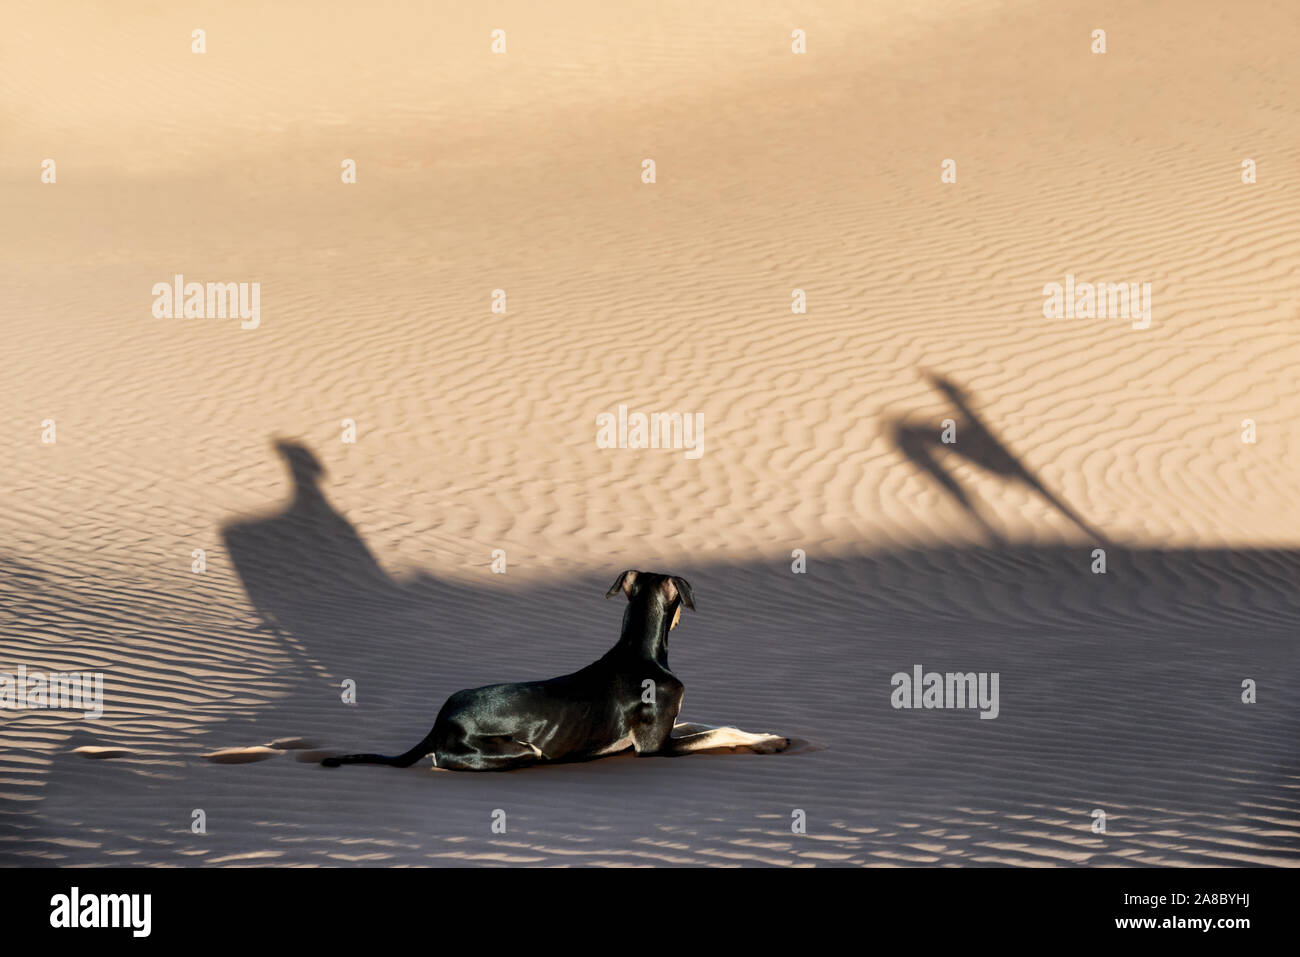 A young black Sloughi dog (Arabian greyhound) rests in the sand dunes in the Sahara desert of Morocco. Stock Photo